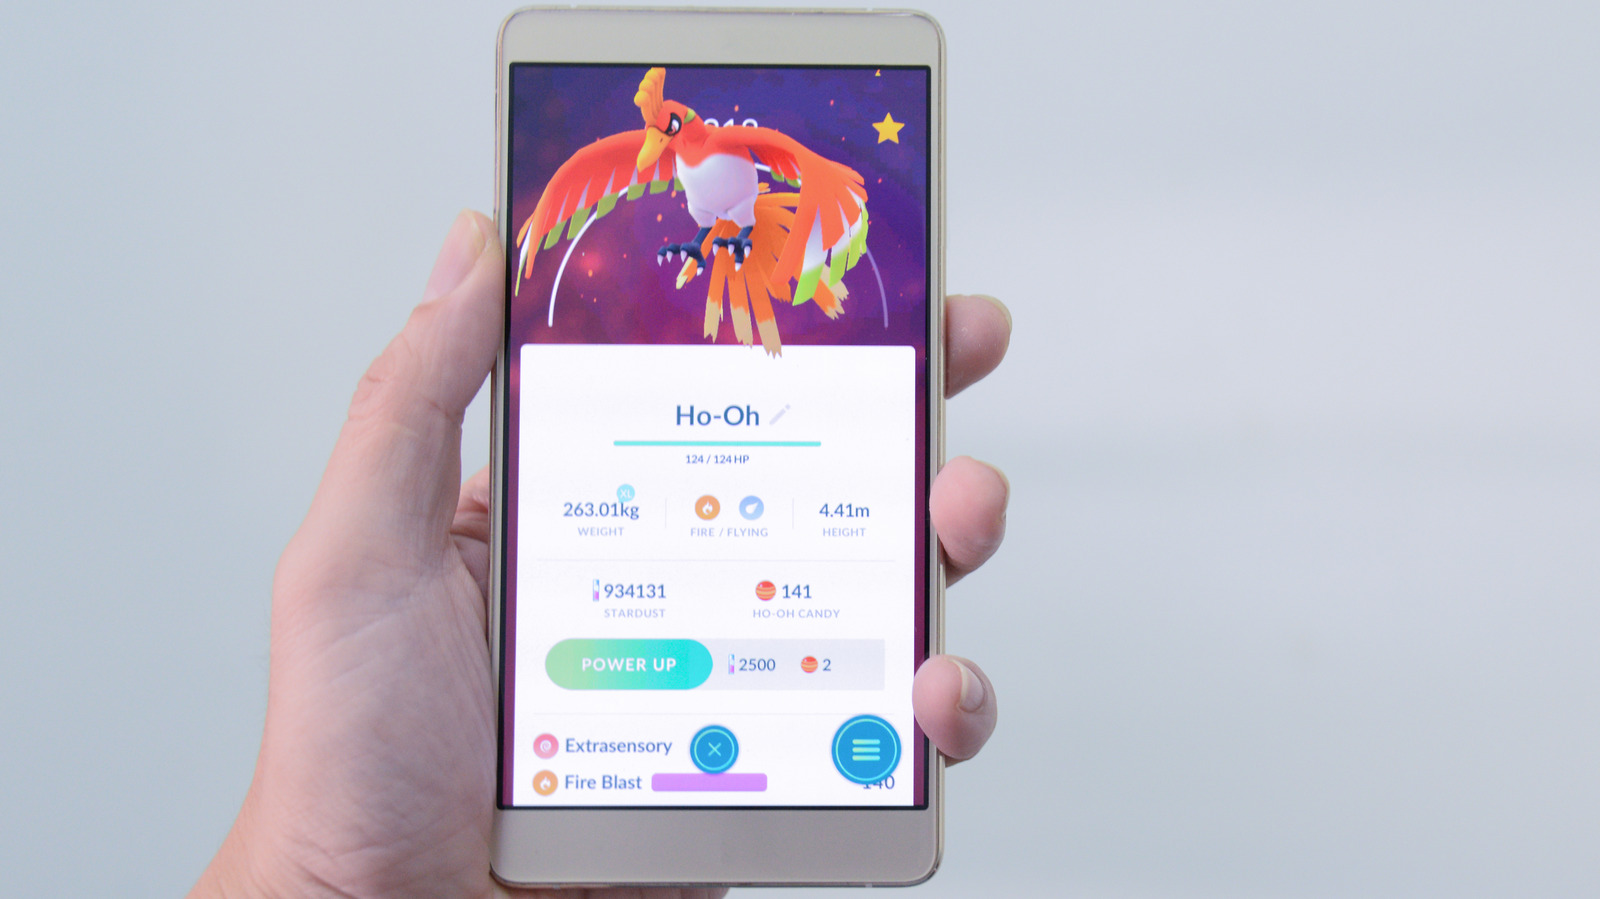 Evidence is mounting that Legendary Pokémon are coming to 'Pokémon Go' very  soon